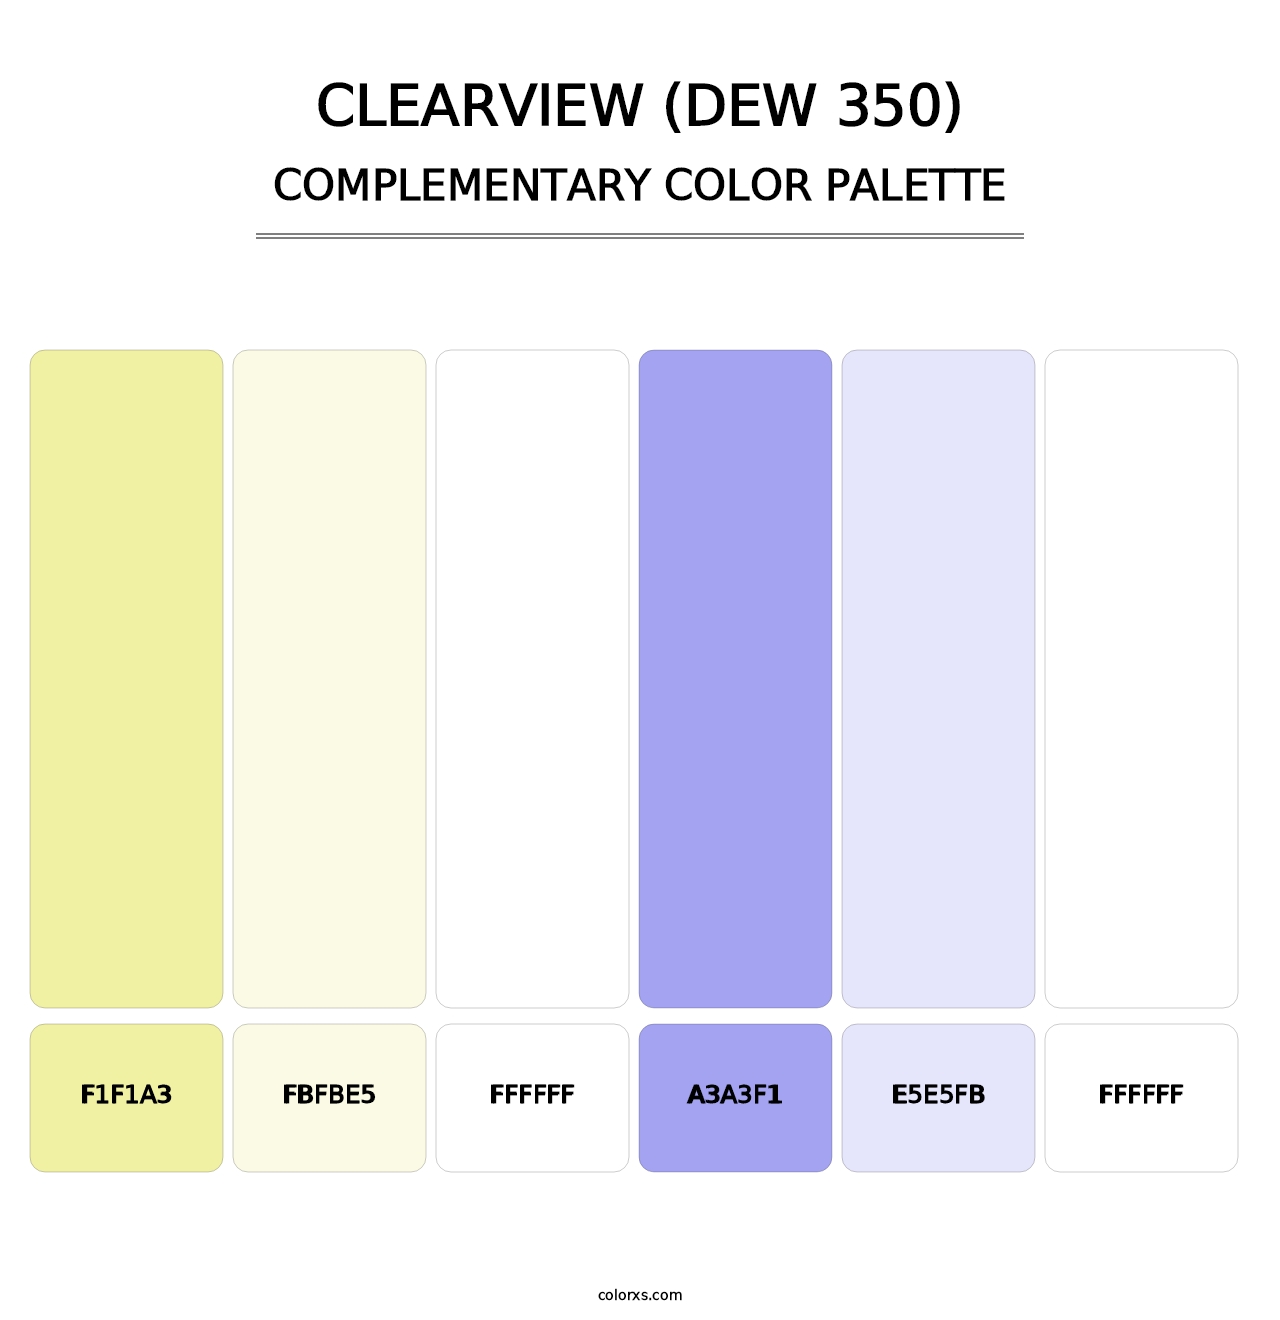 Clearview (DEW 350) - Complementary Color Palette